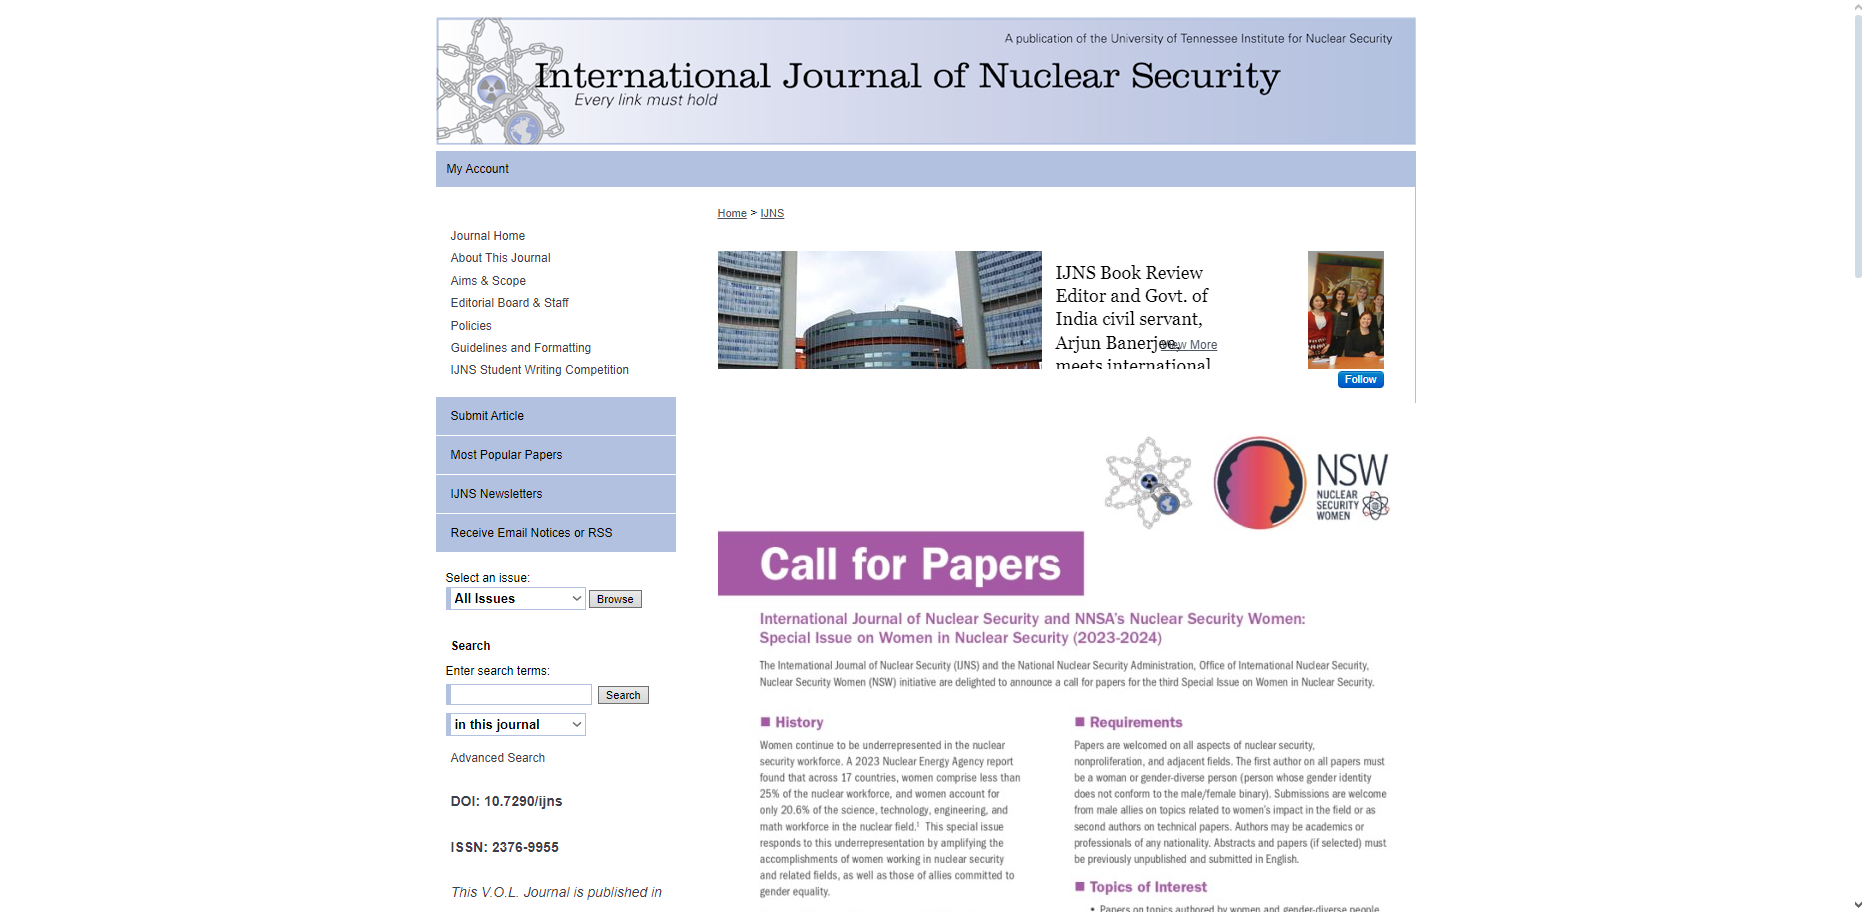  International Journal of Nuclear Security (IJNS)